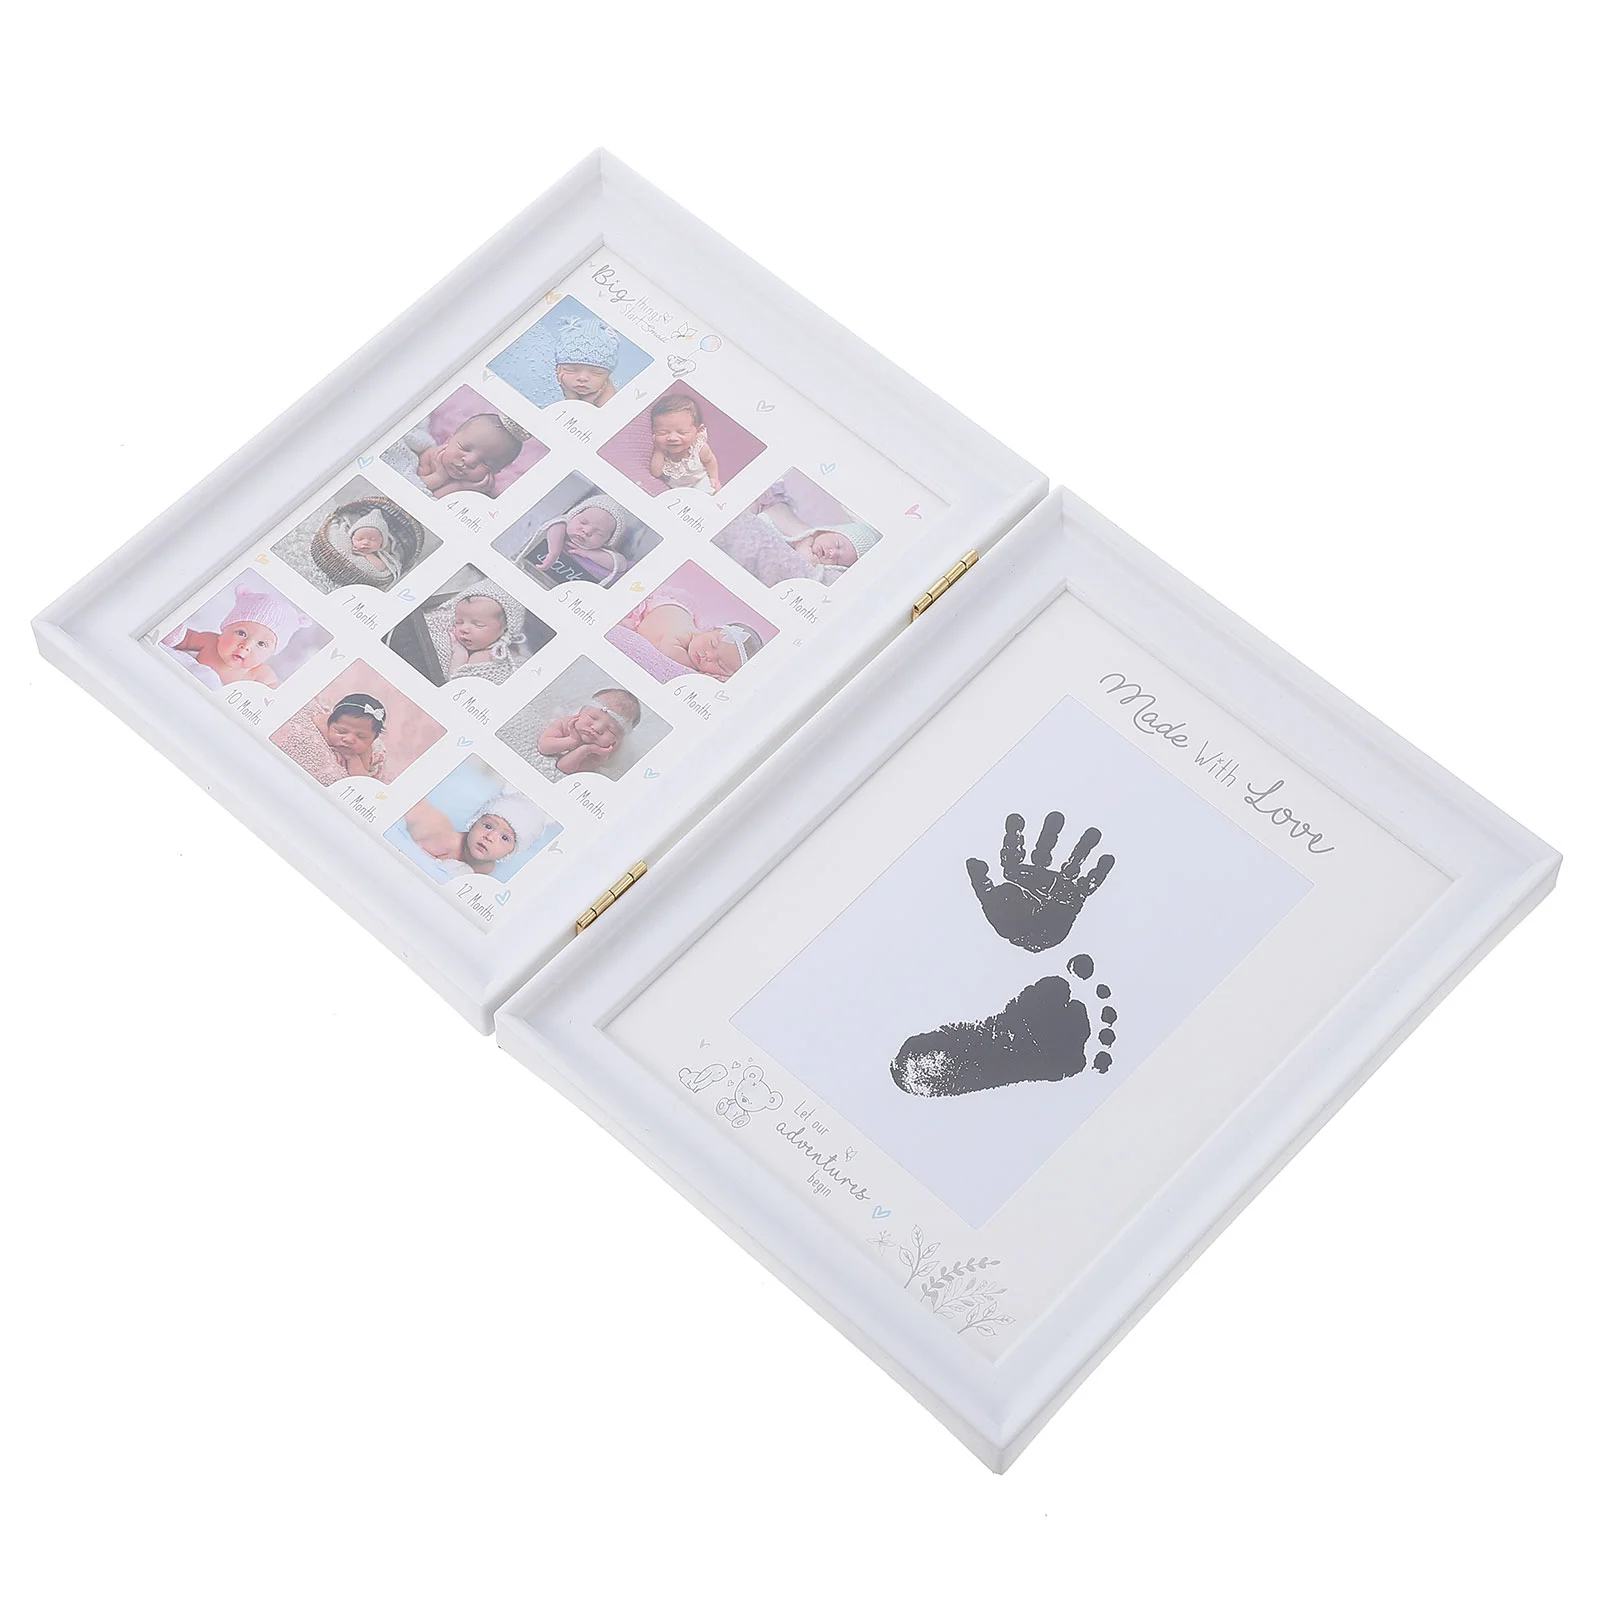 

Ink Pad Photo Frame Set Table Desktop Baby Picture Ornament Infant Growth Recorder Adornment Footprint Holder